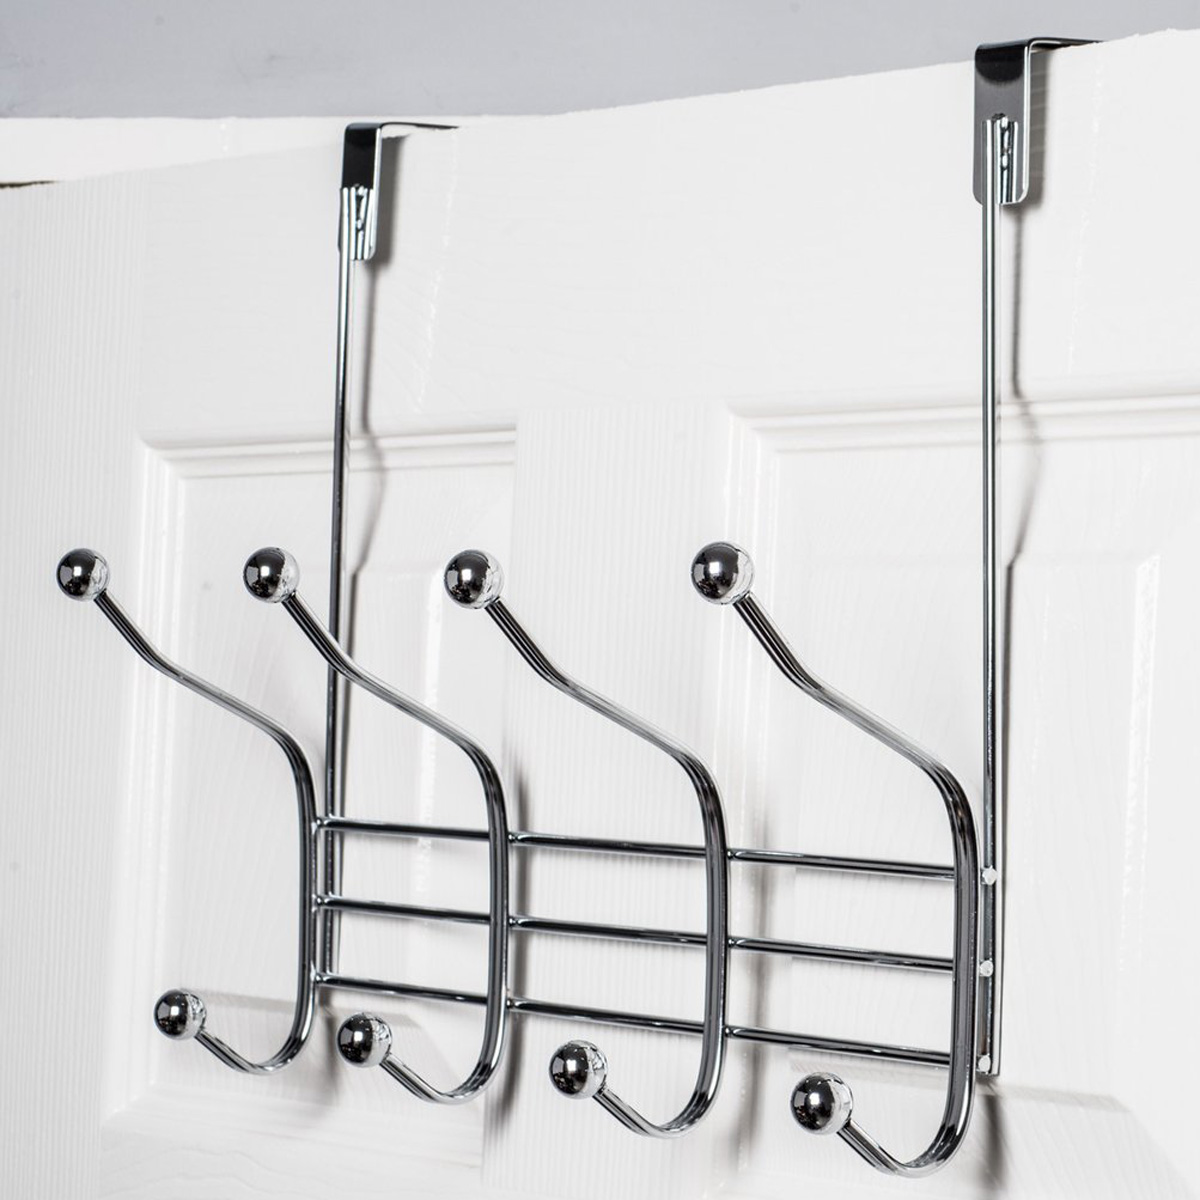 Living & Co Over The Door Hook Chrome Silver Silver